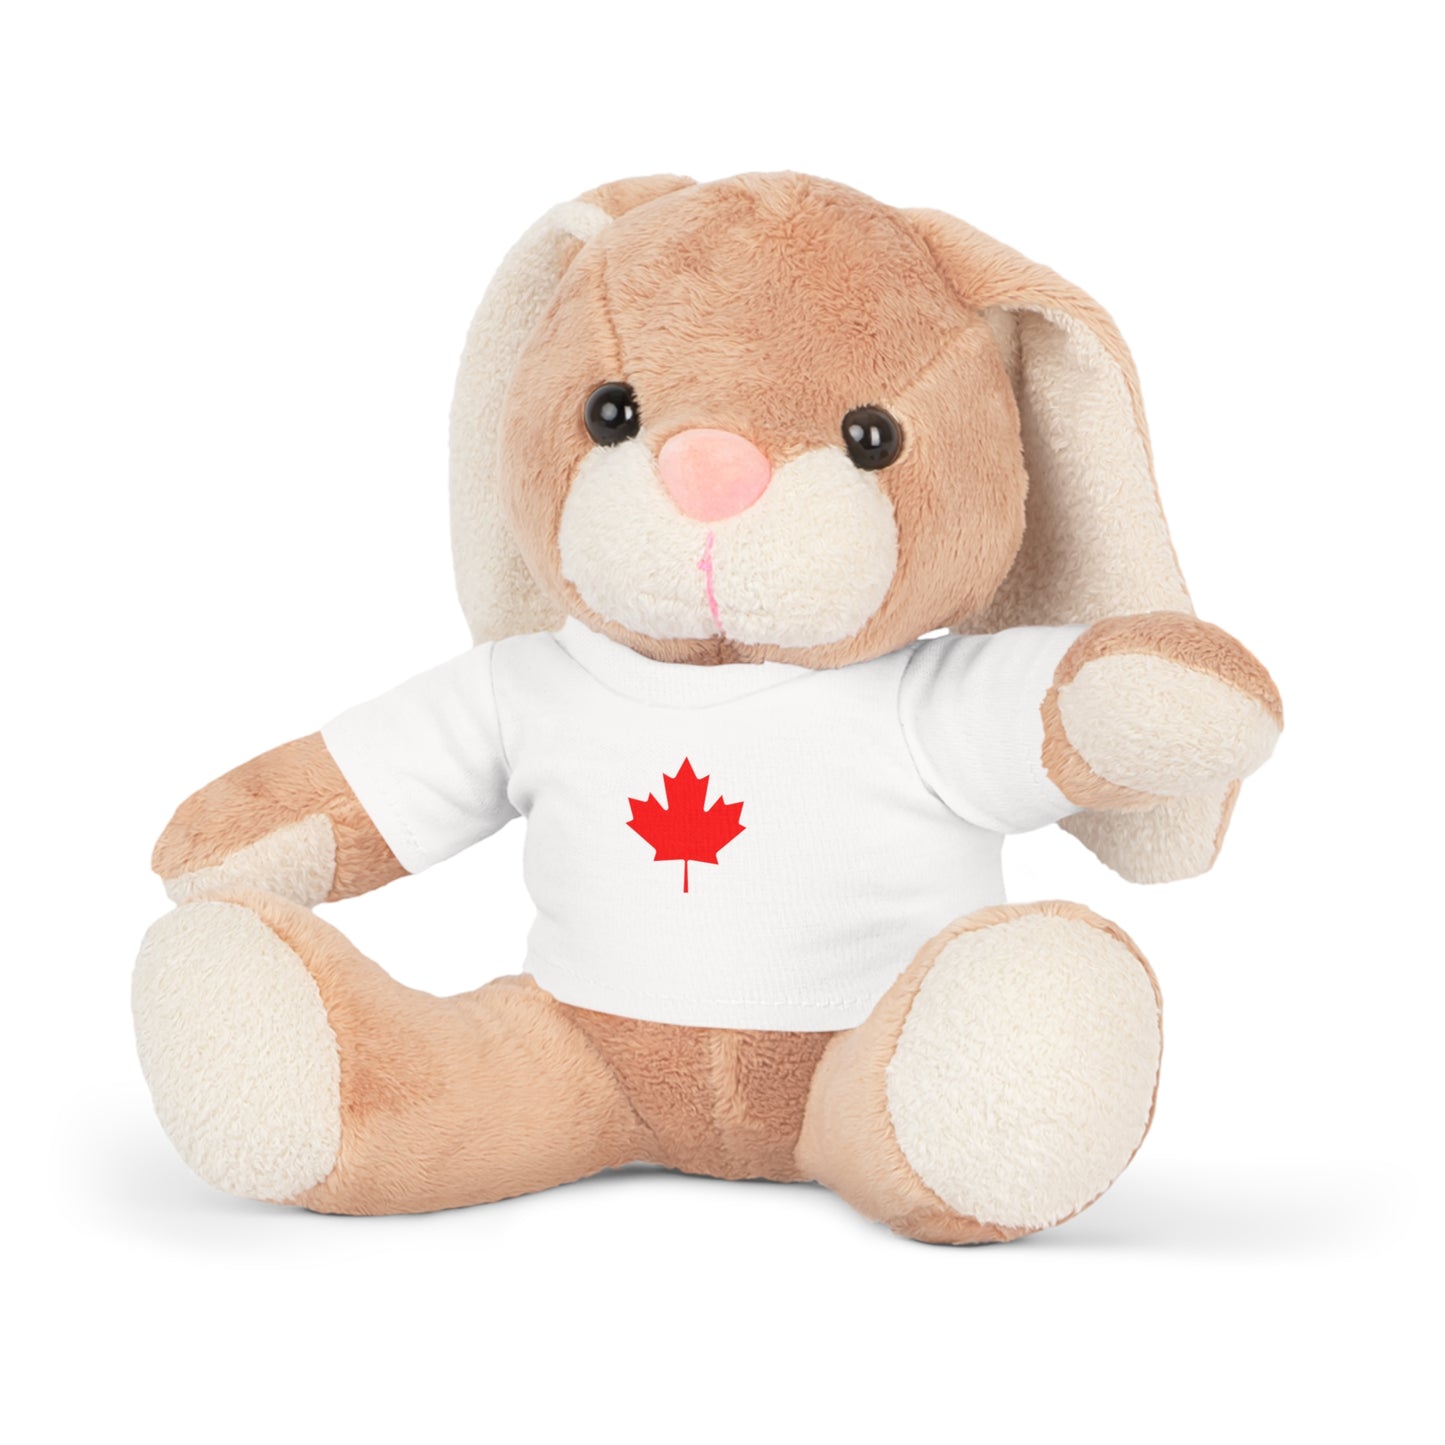 Plush Toy with a Canadian Shirt